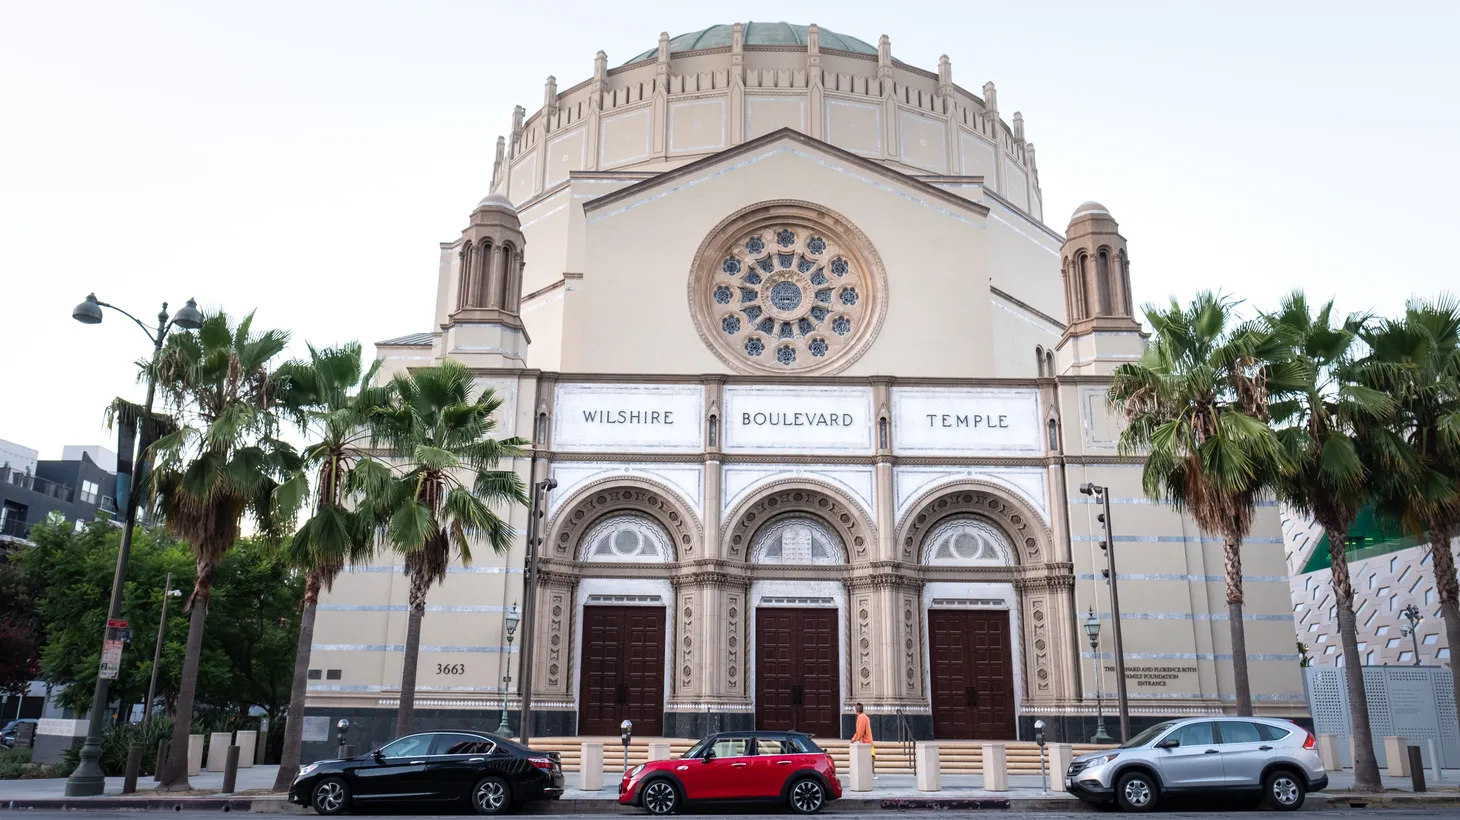 The Wilshire Boulevard Temple is led by rabbi Steve Leder. He says the Texas hostage situation is an example of the widespread extremism and anti-Semitism that still exists in America.